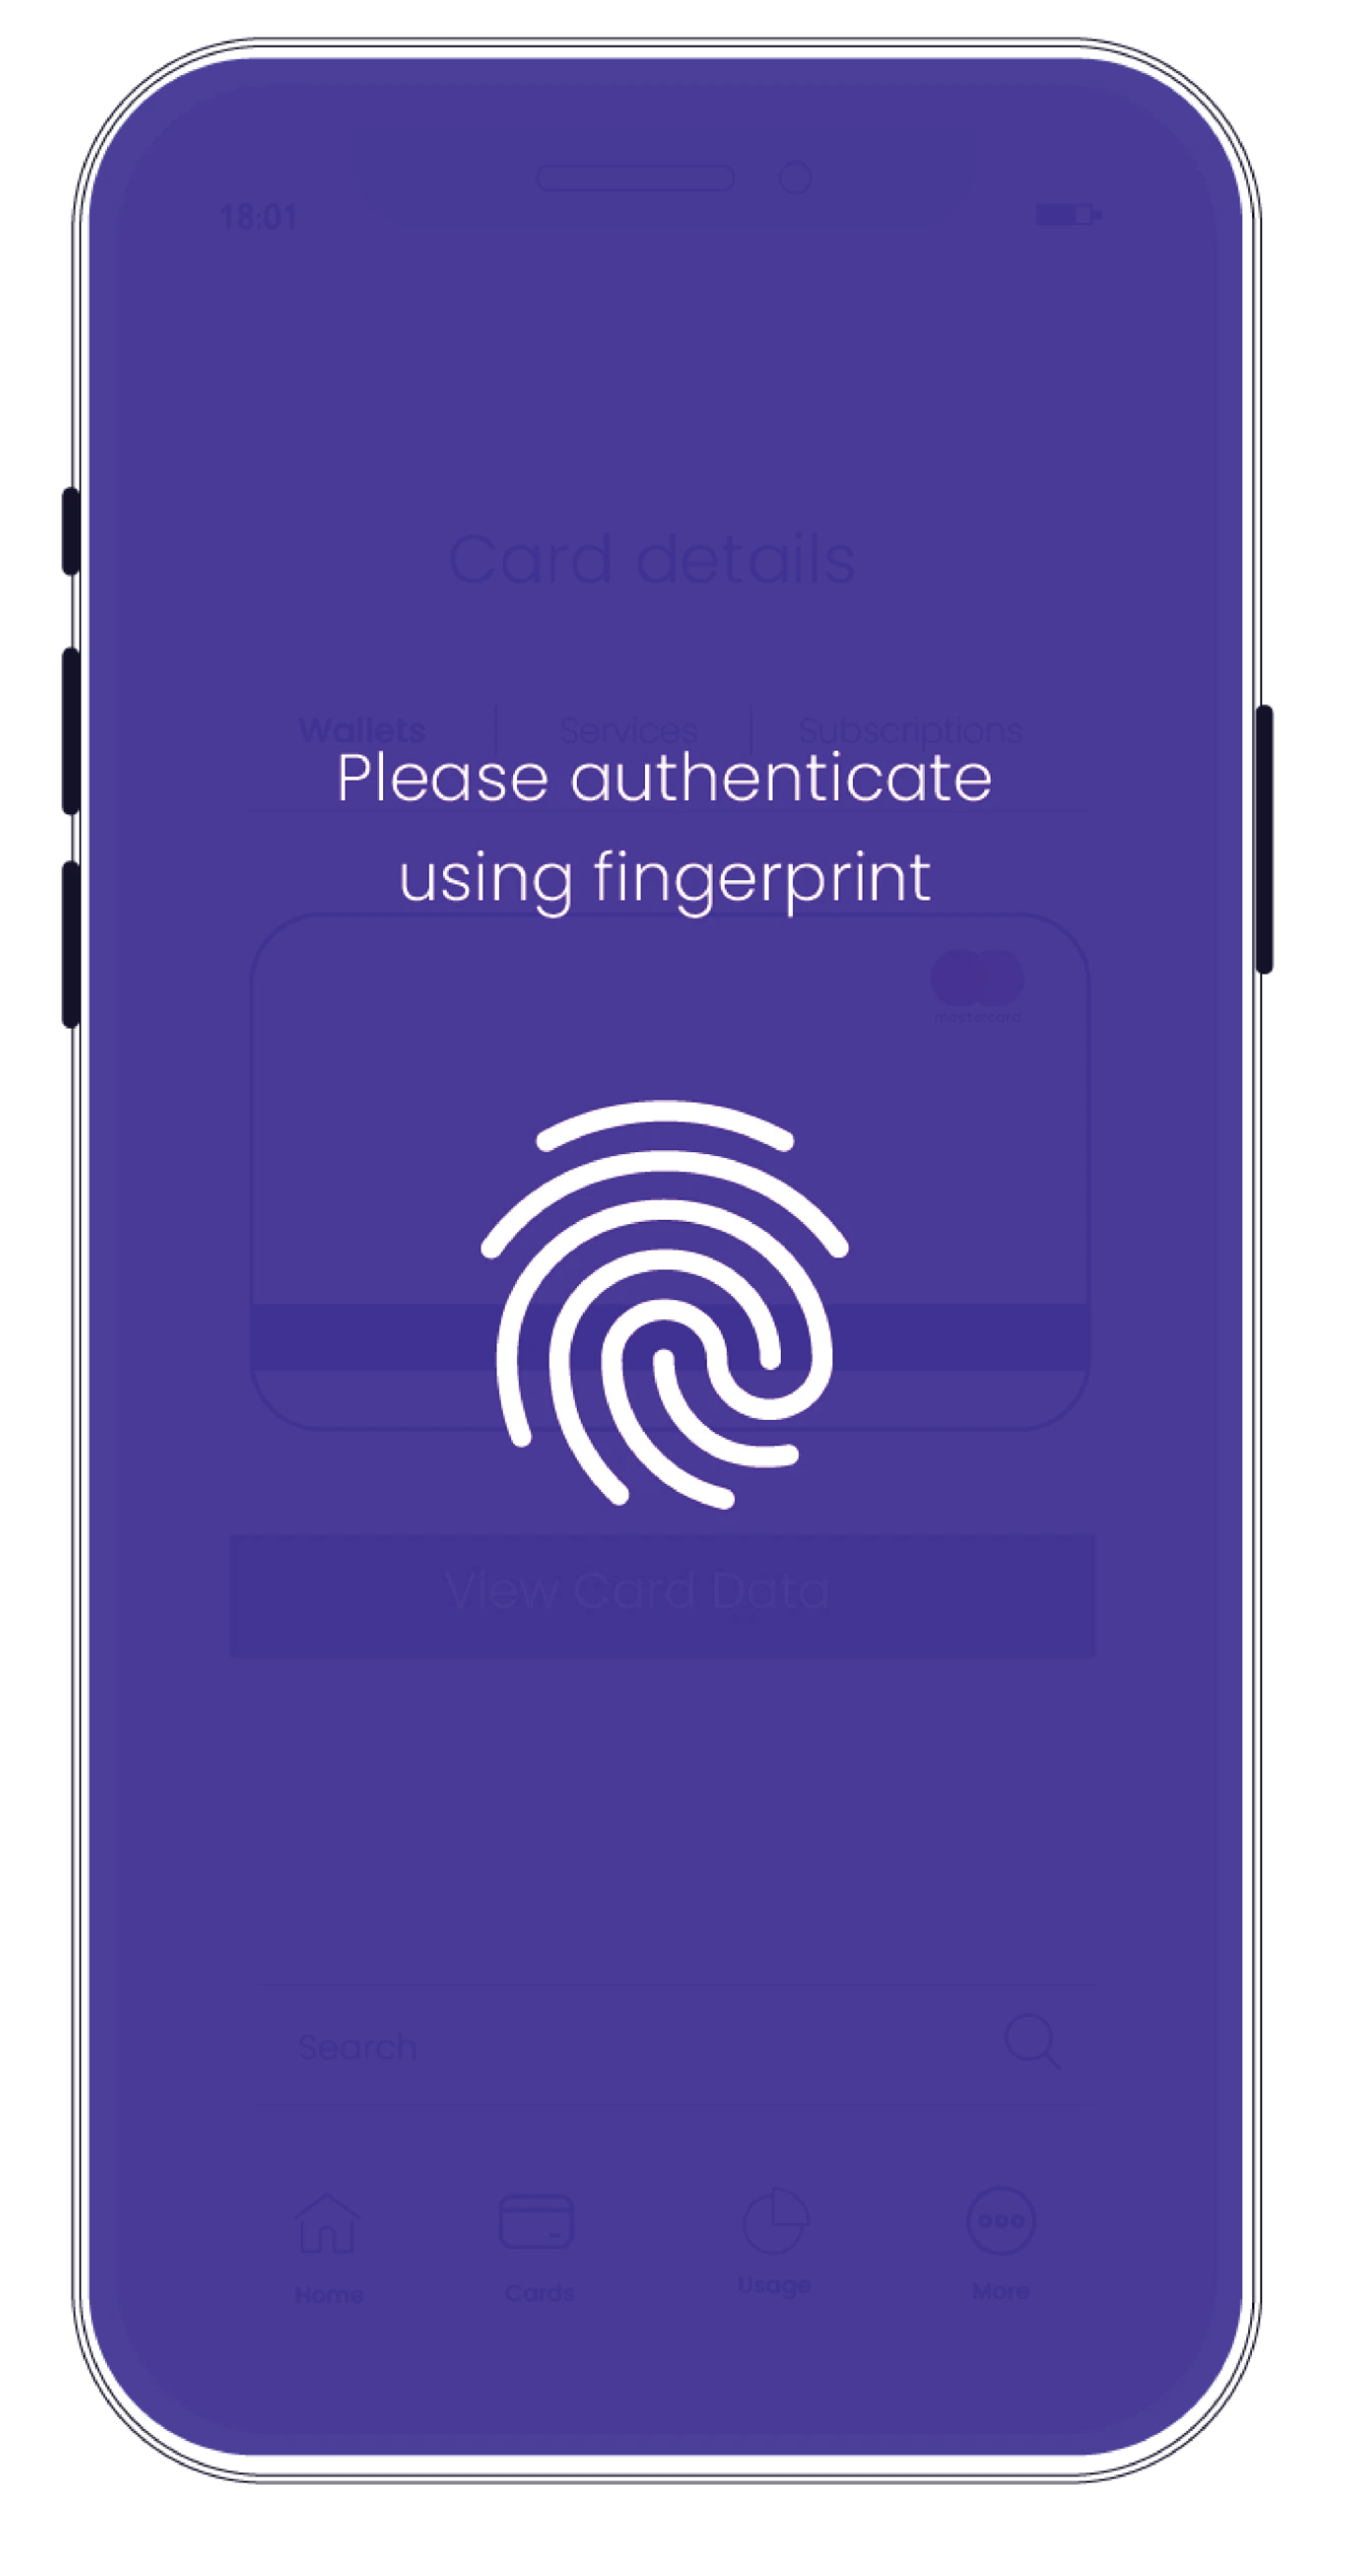 provide authentication_digital cards